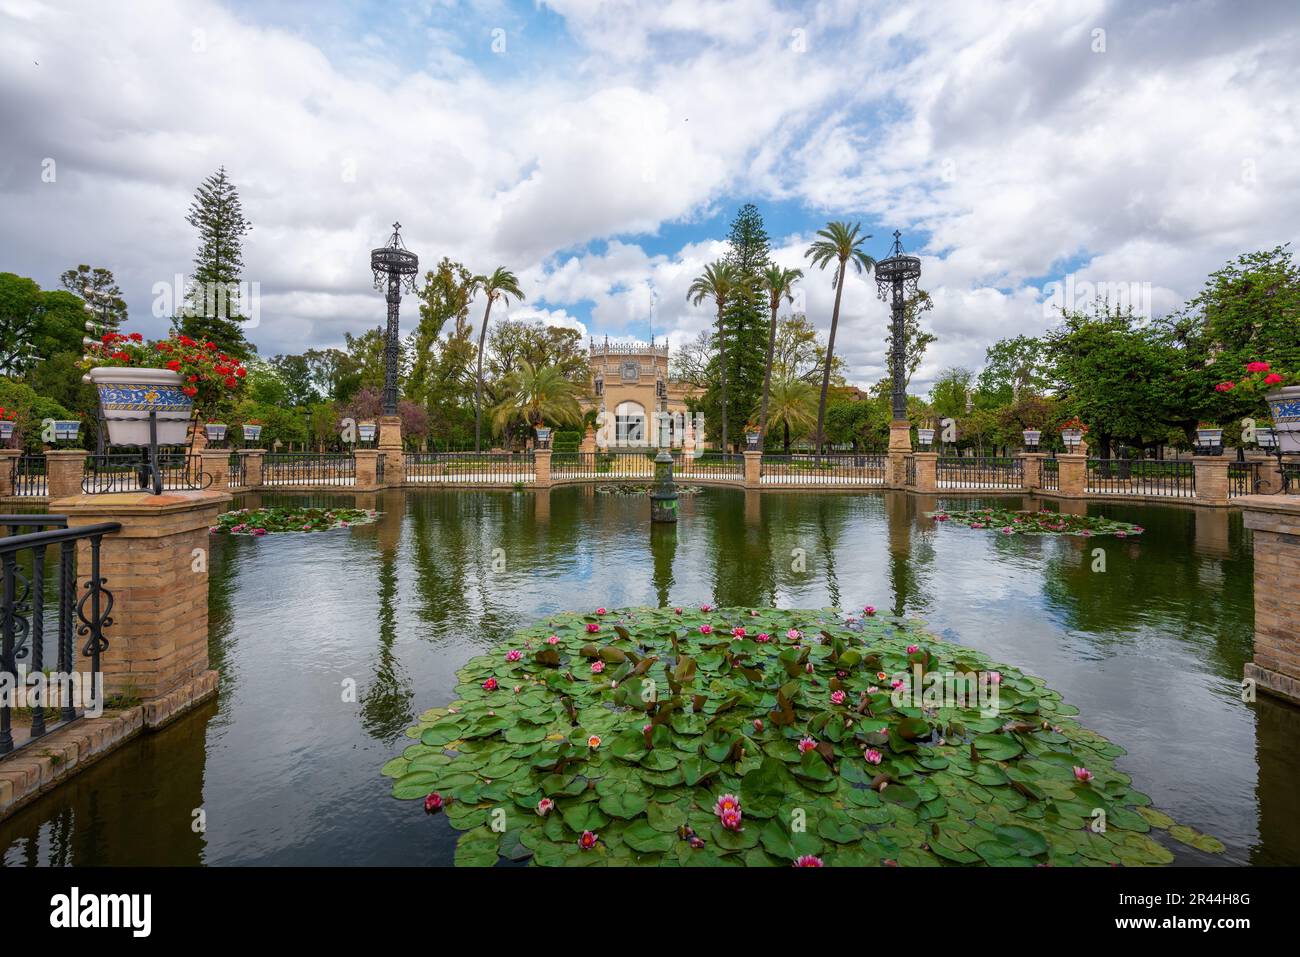 Plaza de America Central Pond and Royal pavilion (Pabellon Real) at Maria Luisa Park - Seville, Andalusia, Spain Stock Photo